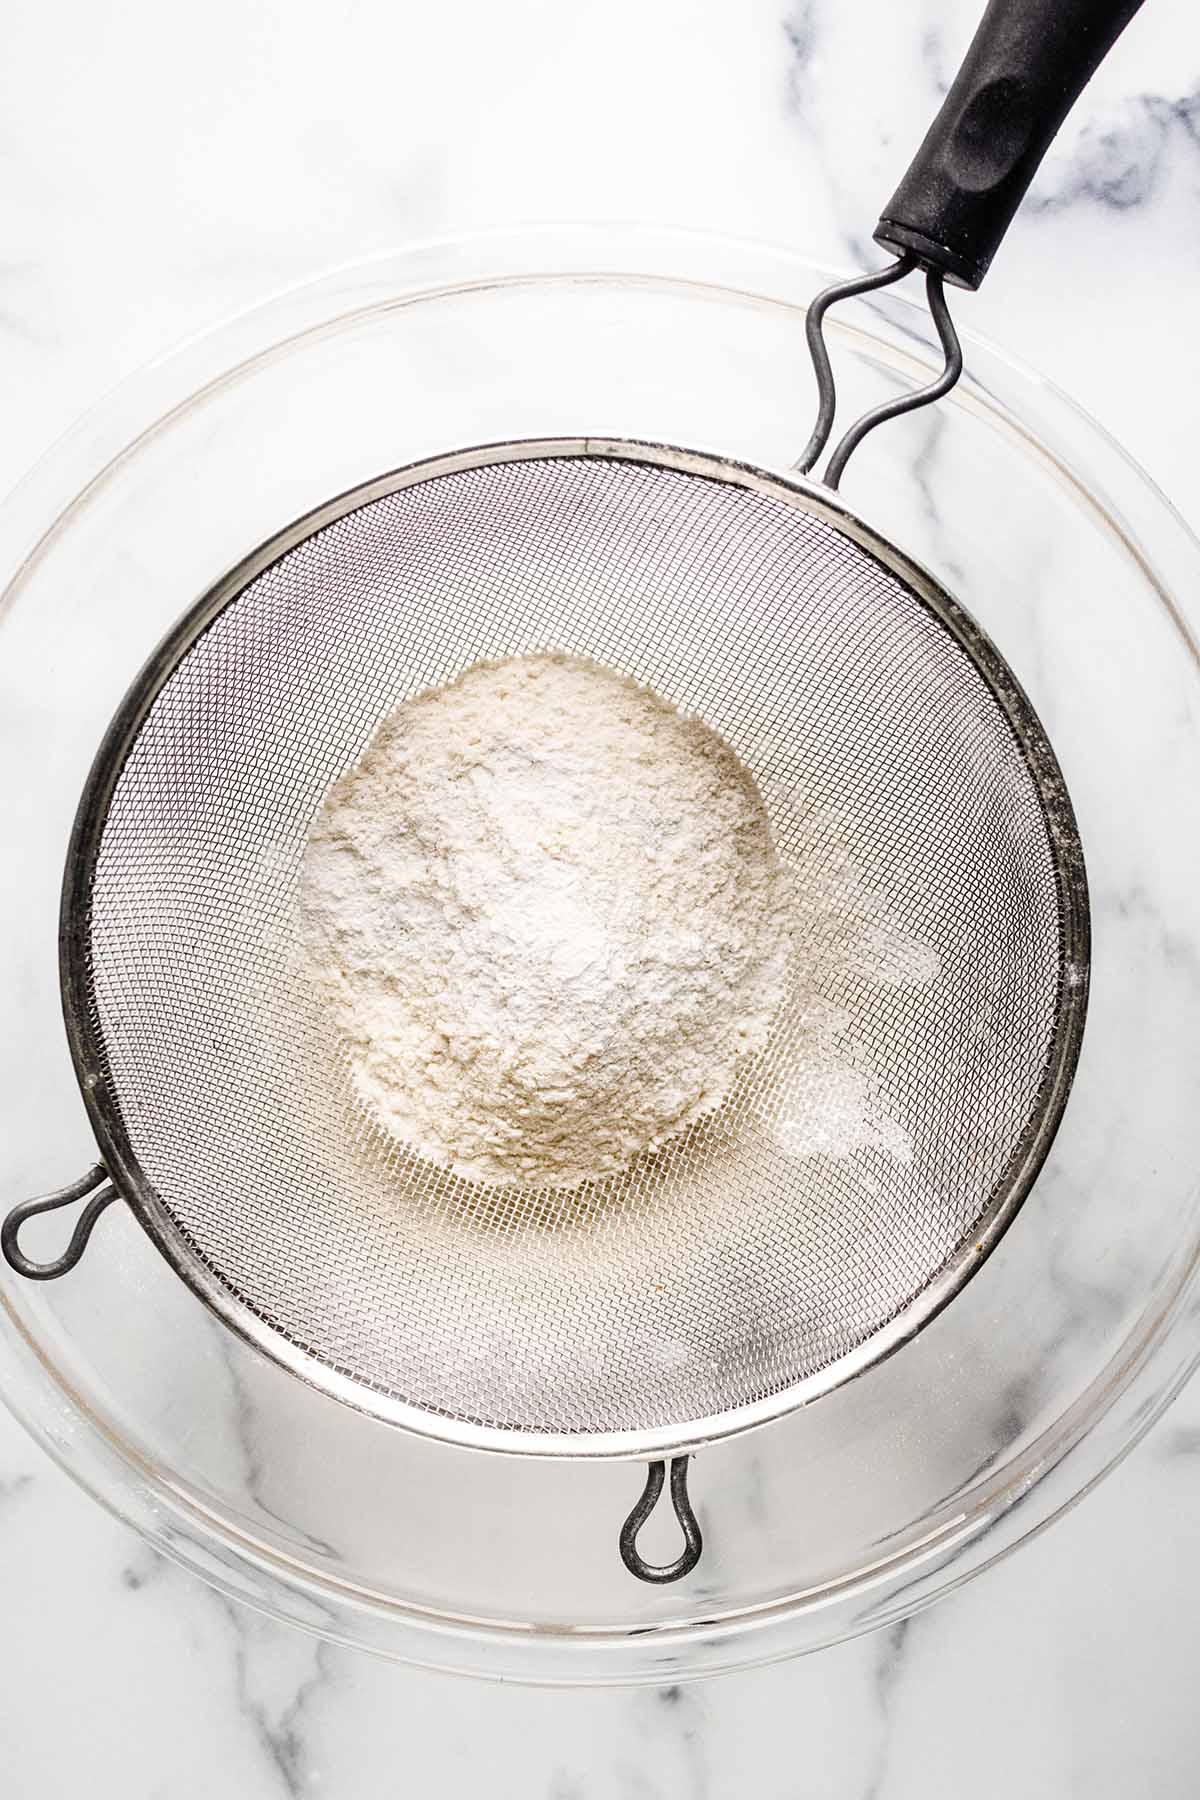 Overhead view of dry ingredients in a mesh strainer over a large glass bowl.